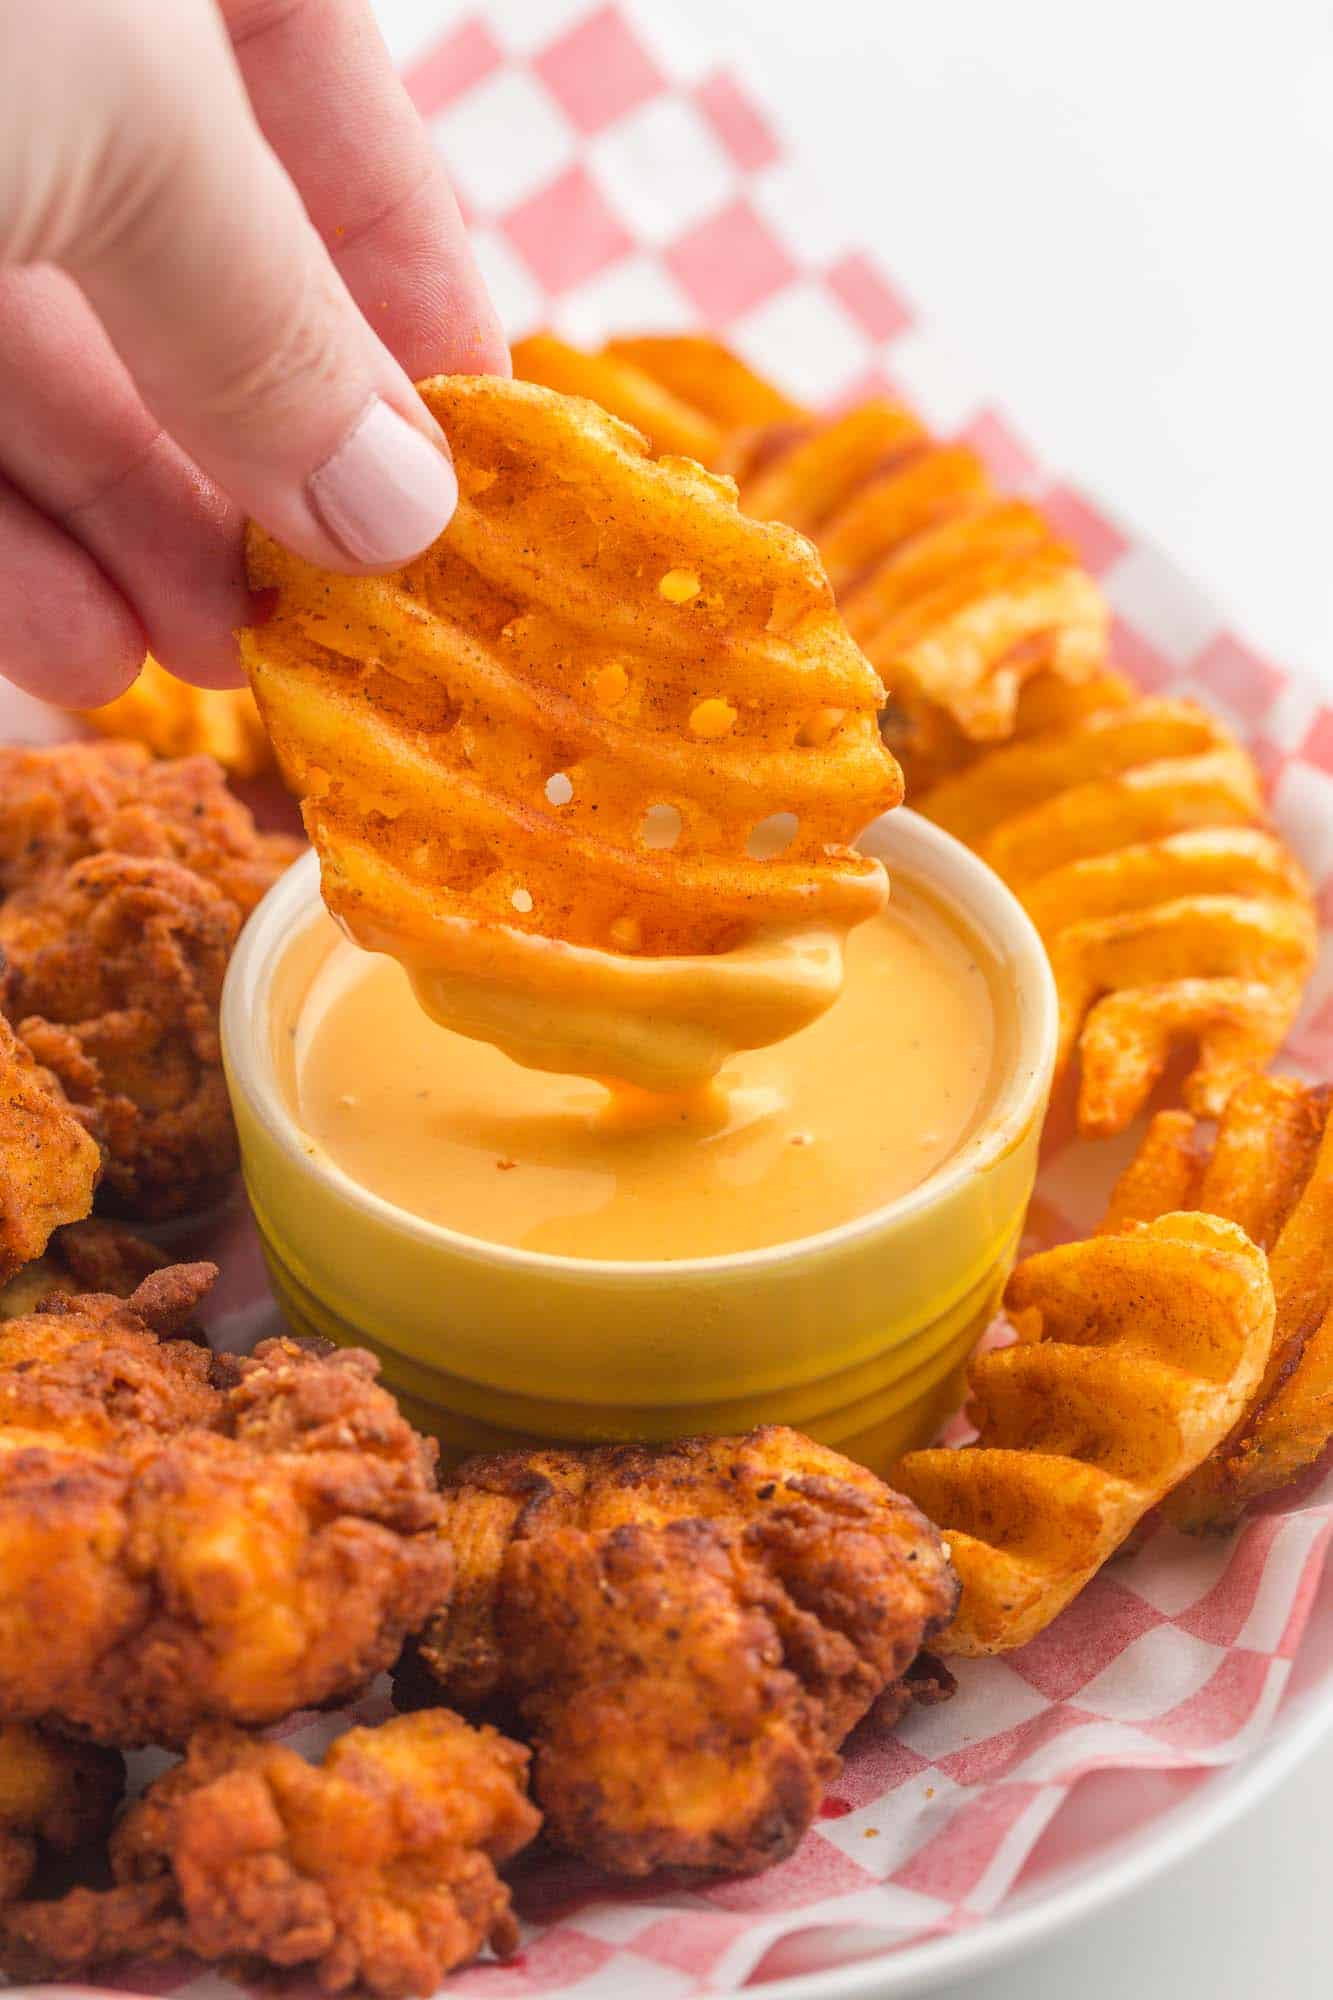 a hand dipping a waffle fry into a cup of chick fil a sauce on a plate of chicken nuggets